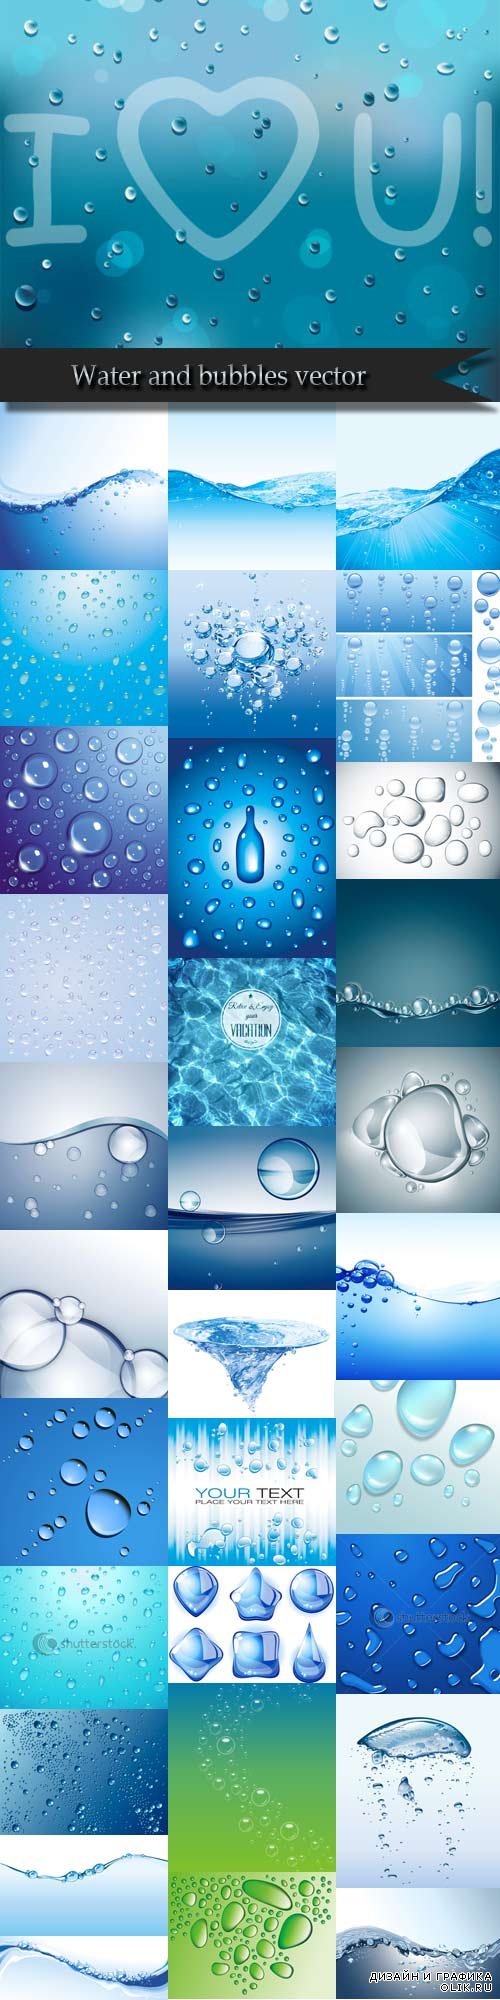 Water and bubbles vector